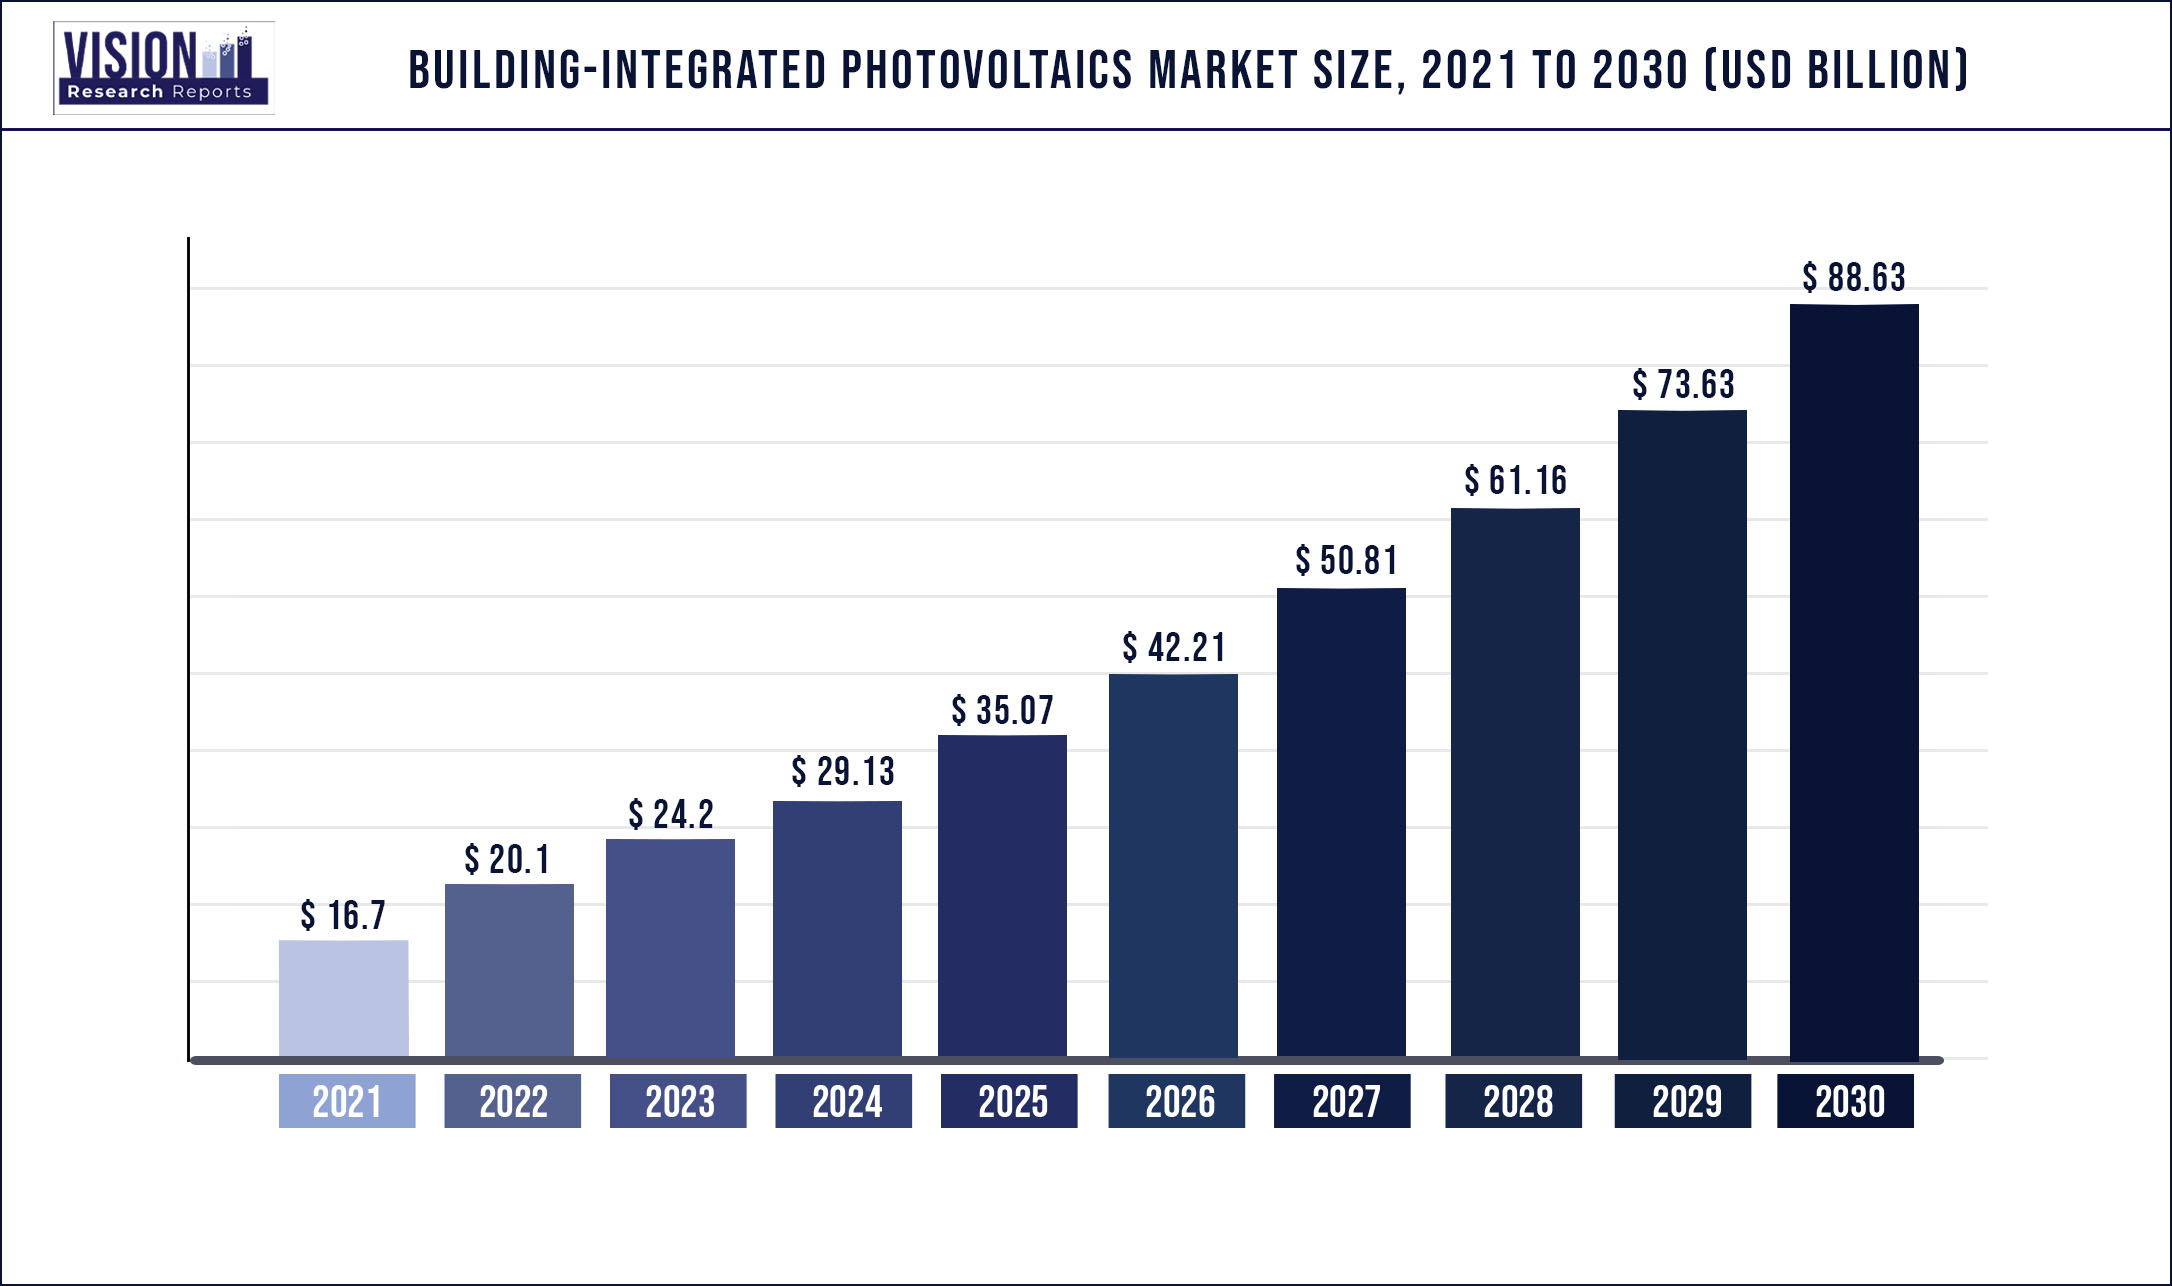 Building-integrated Photovoltaics Market Size 2021 to 2030